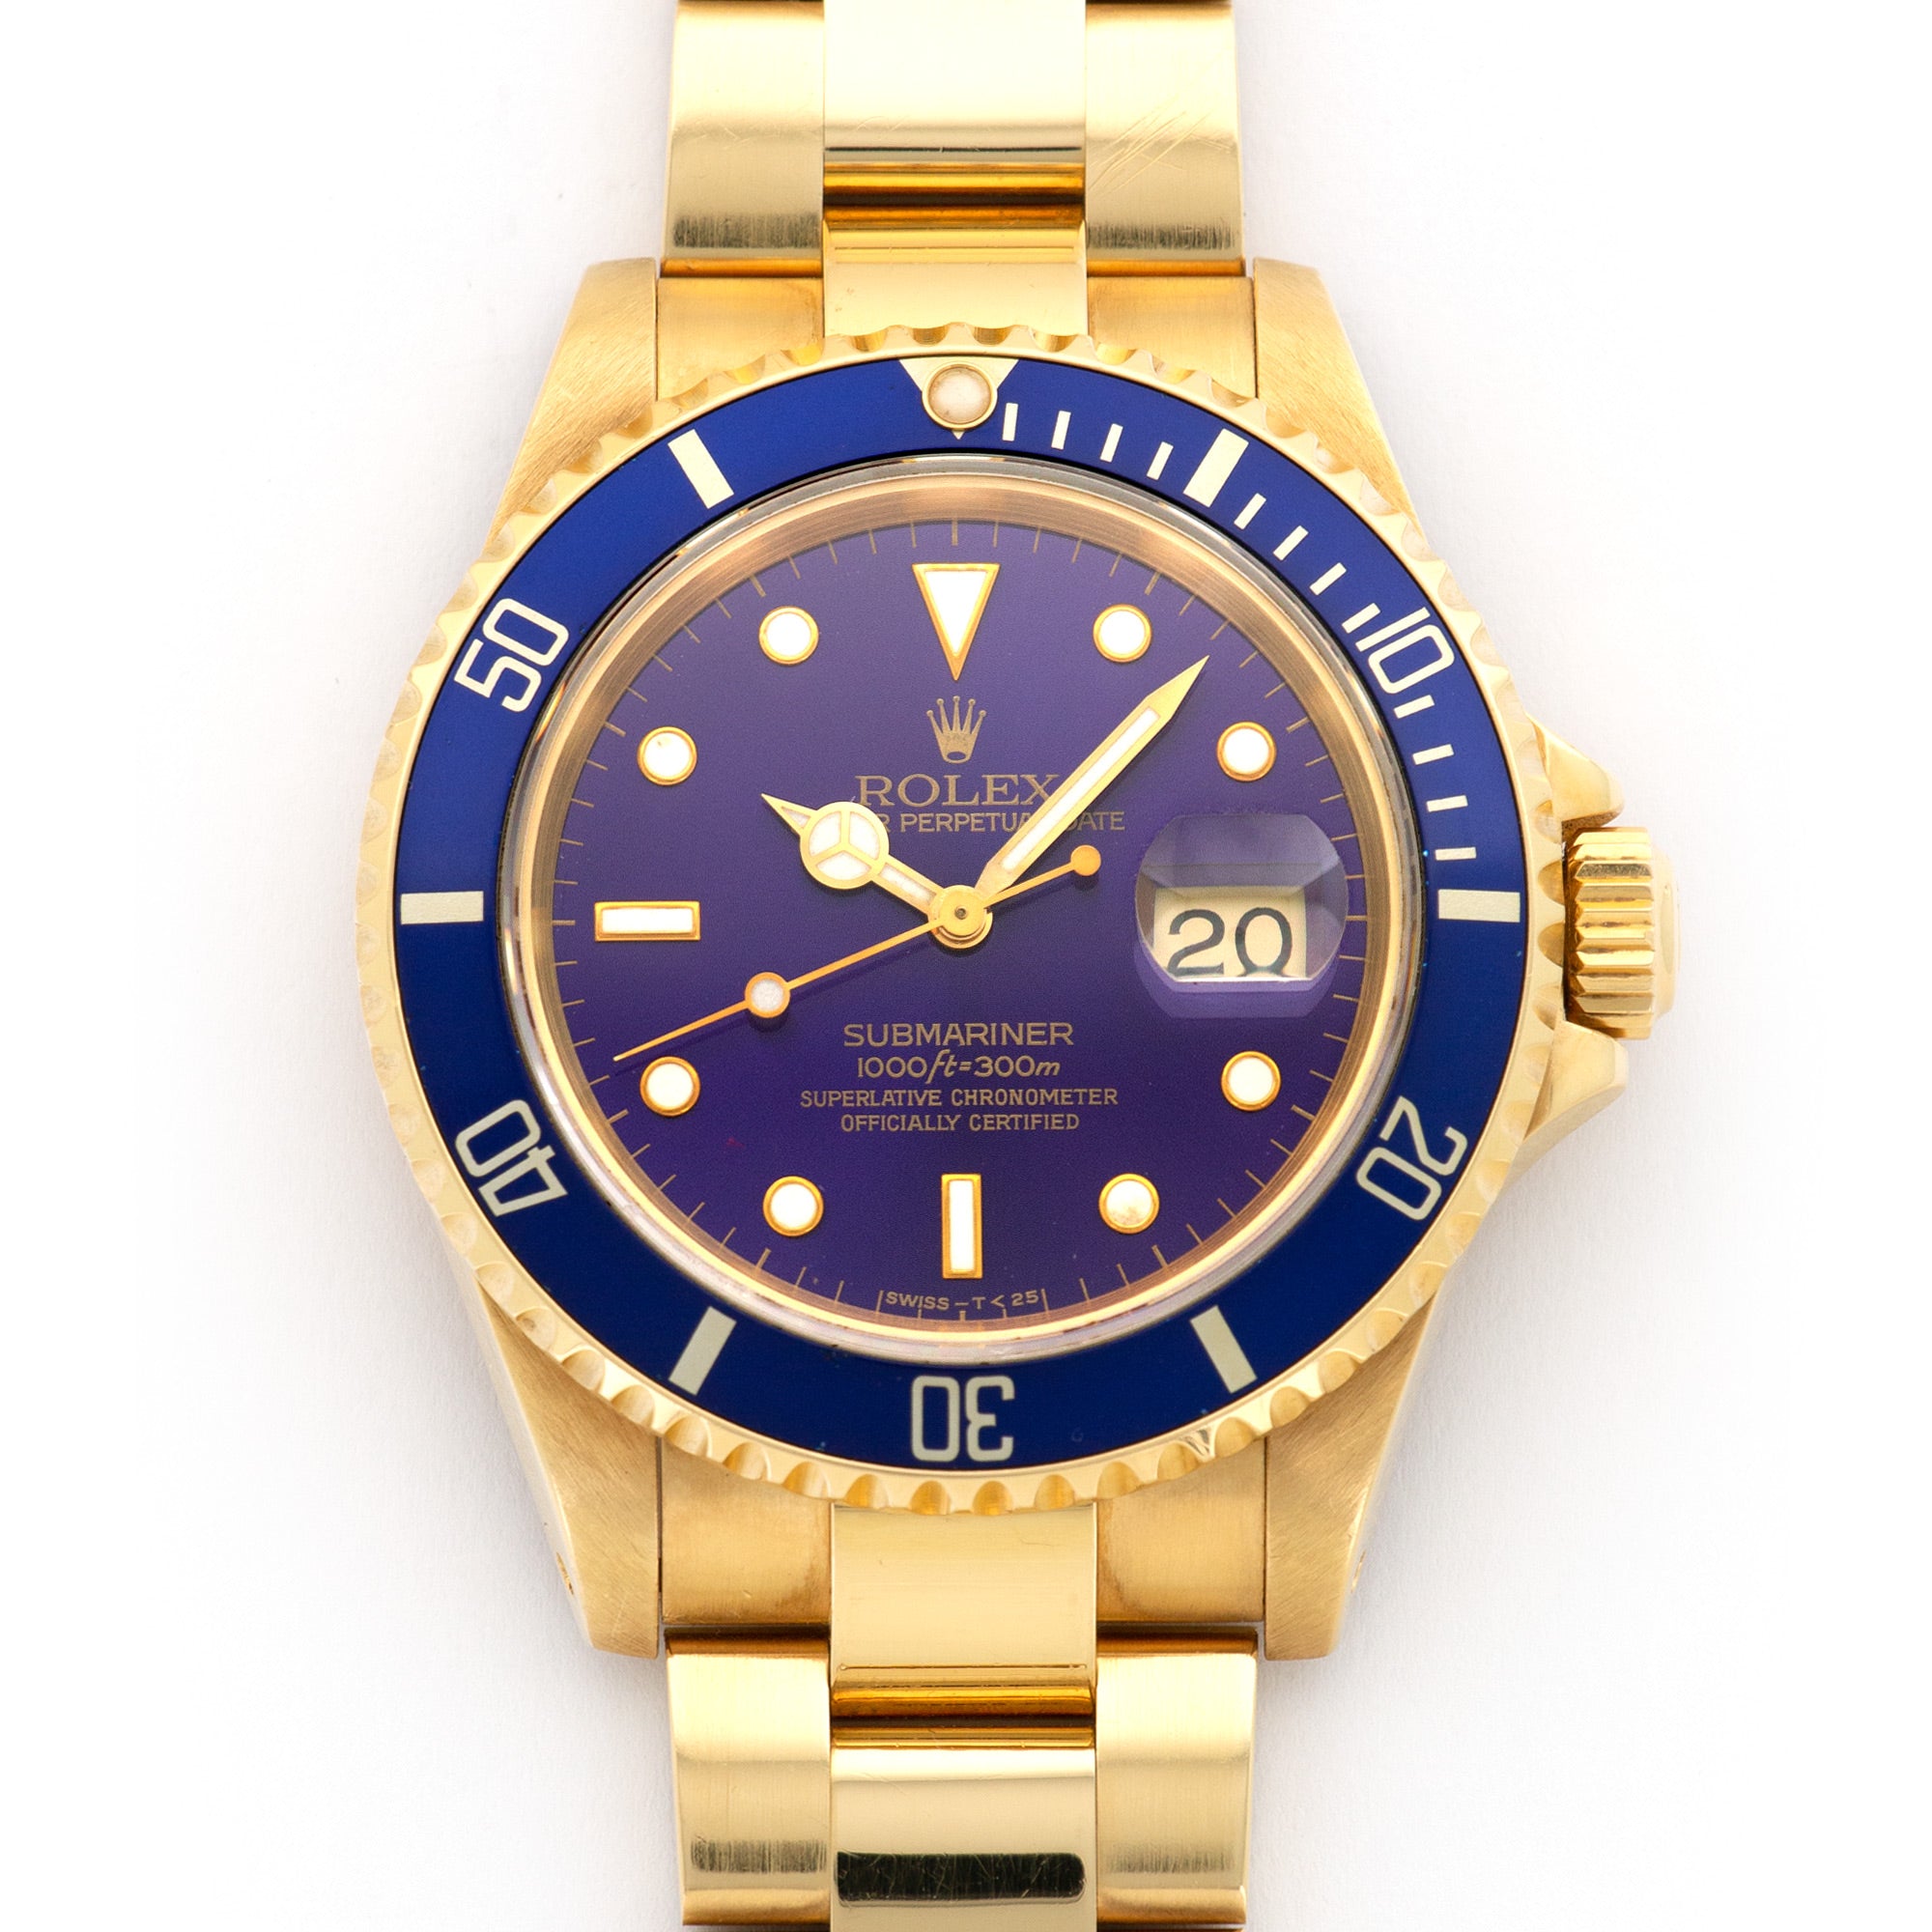 Rolex - Rolex Yellow Gold Submariner Watch Ref 16618 with Original Tropical Purple Dial - The Keystone Watches